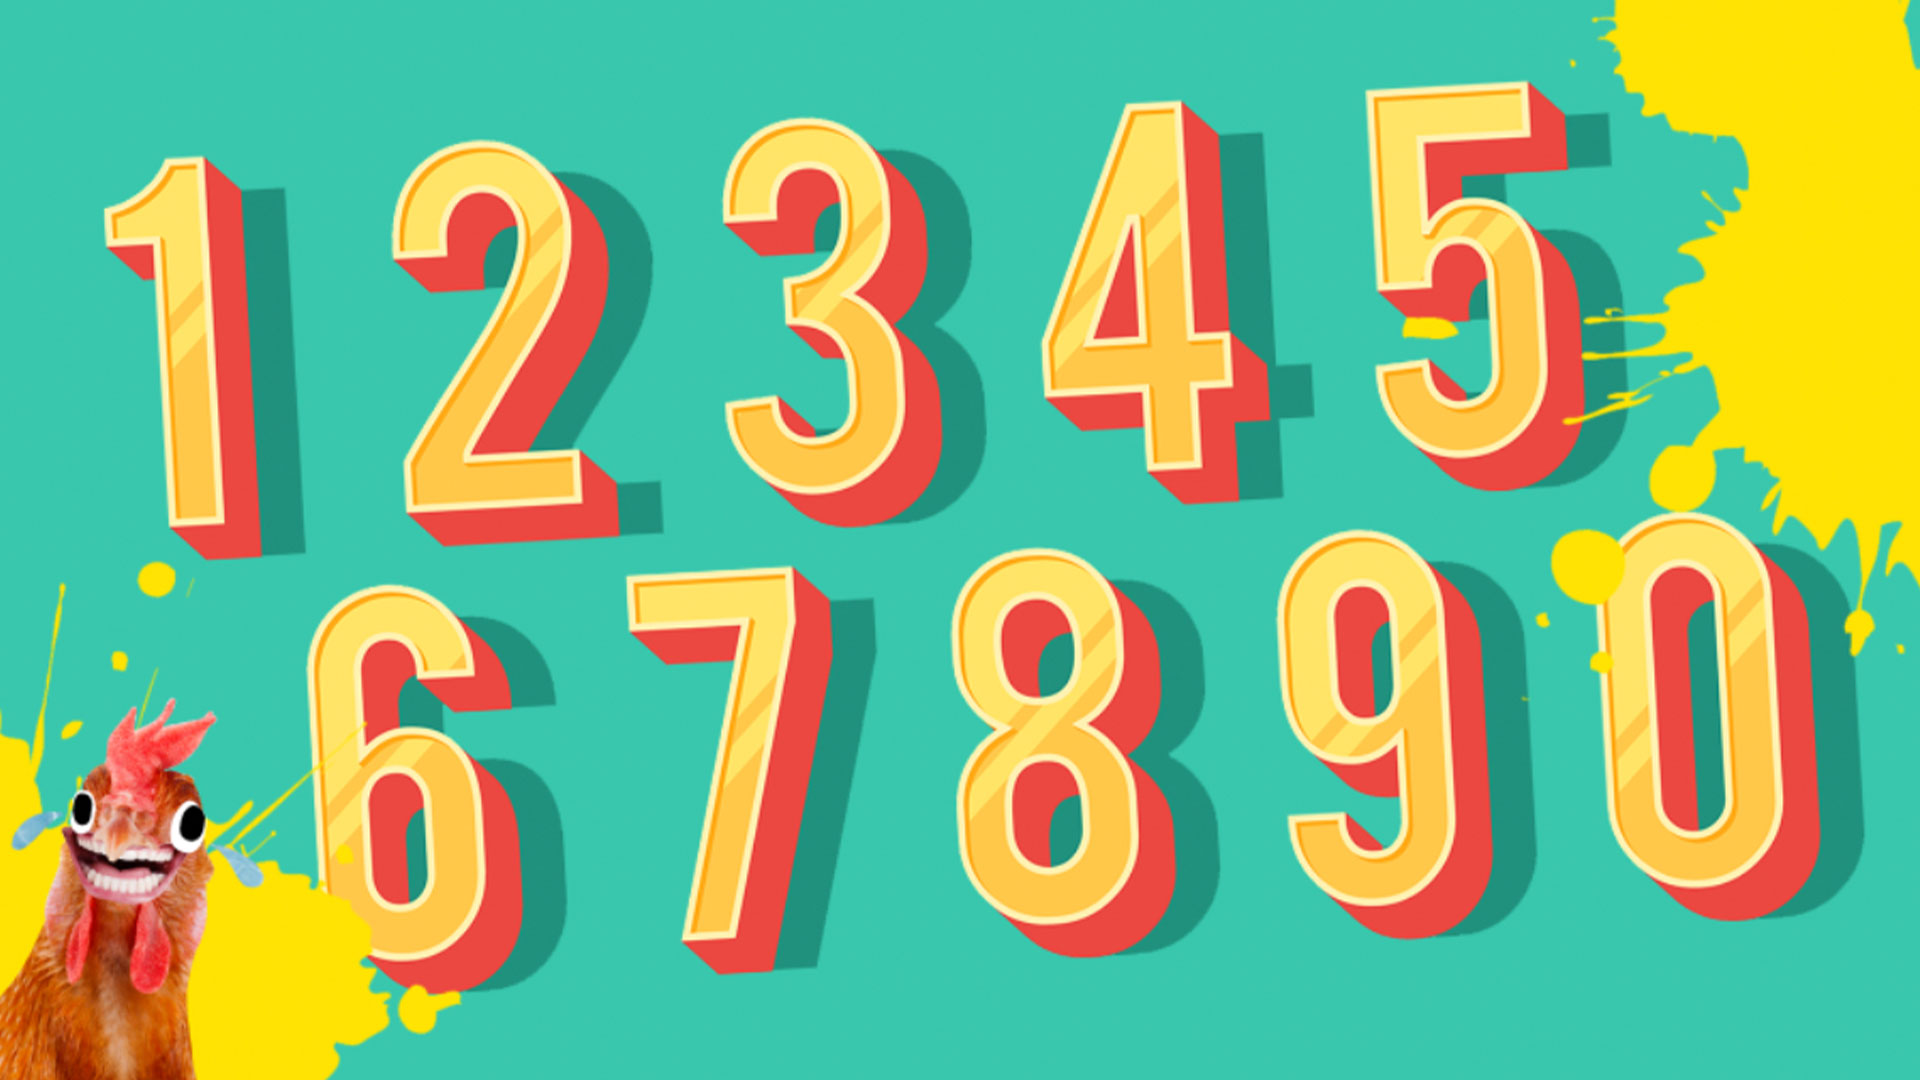 A selection of numbers